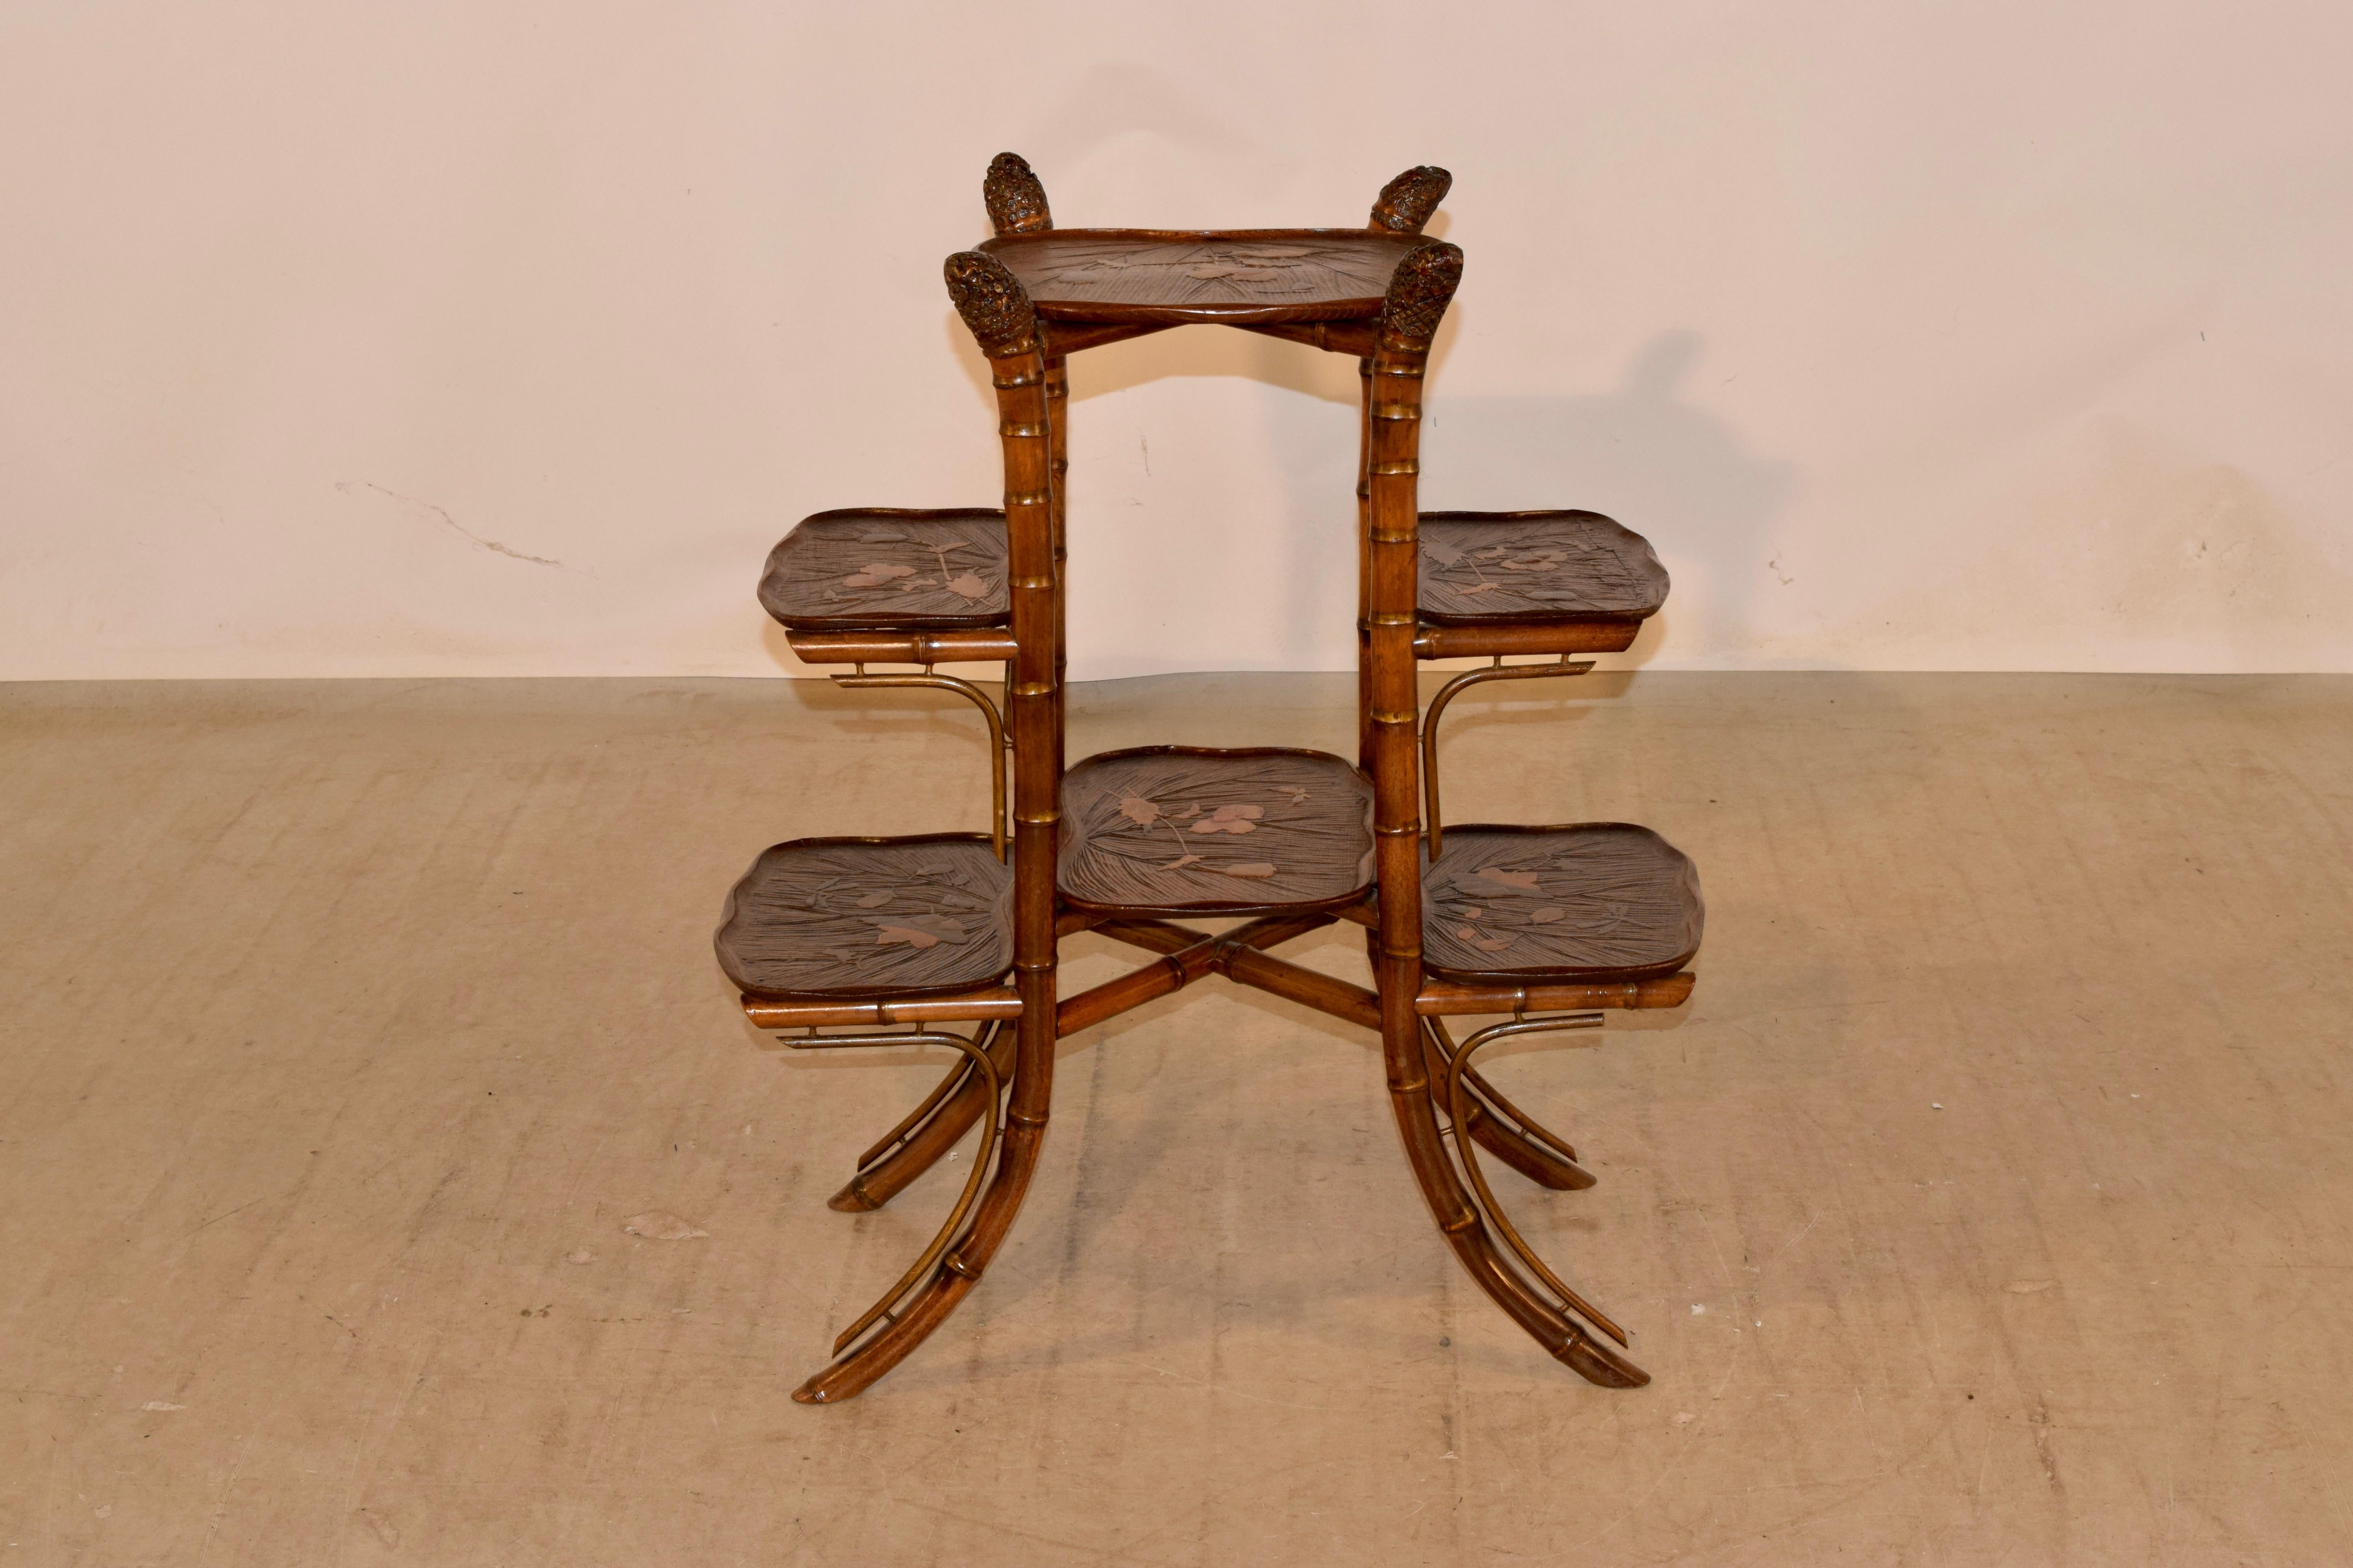 19th century bamboo tiered table from France with hand carved fruitwood shelves. The top of the legs are the roots of the bamboo, which has been artfully used as a decorating feature on this table. The legs are gracefully splayed, and have hand